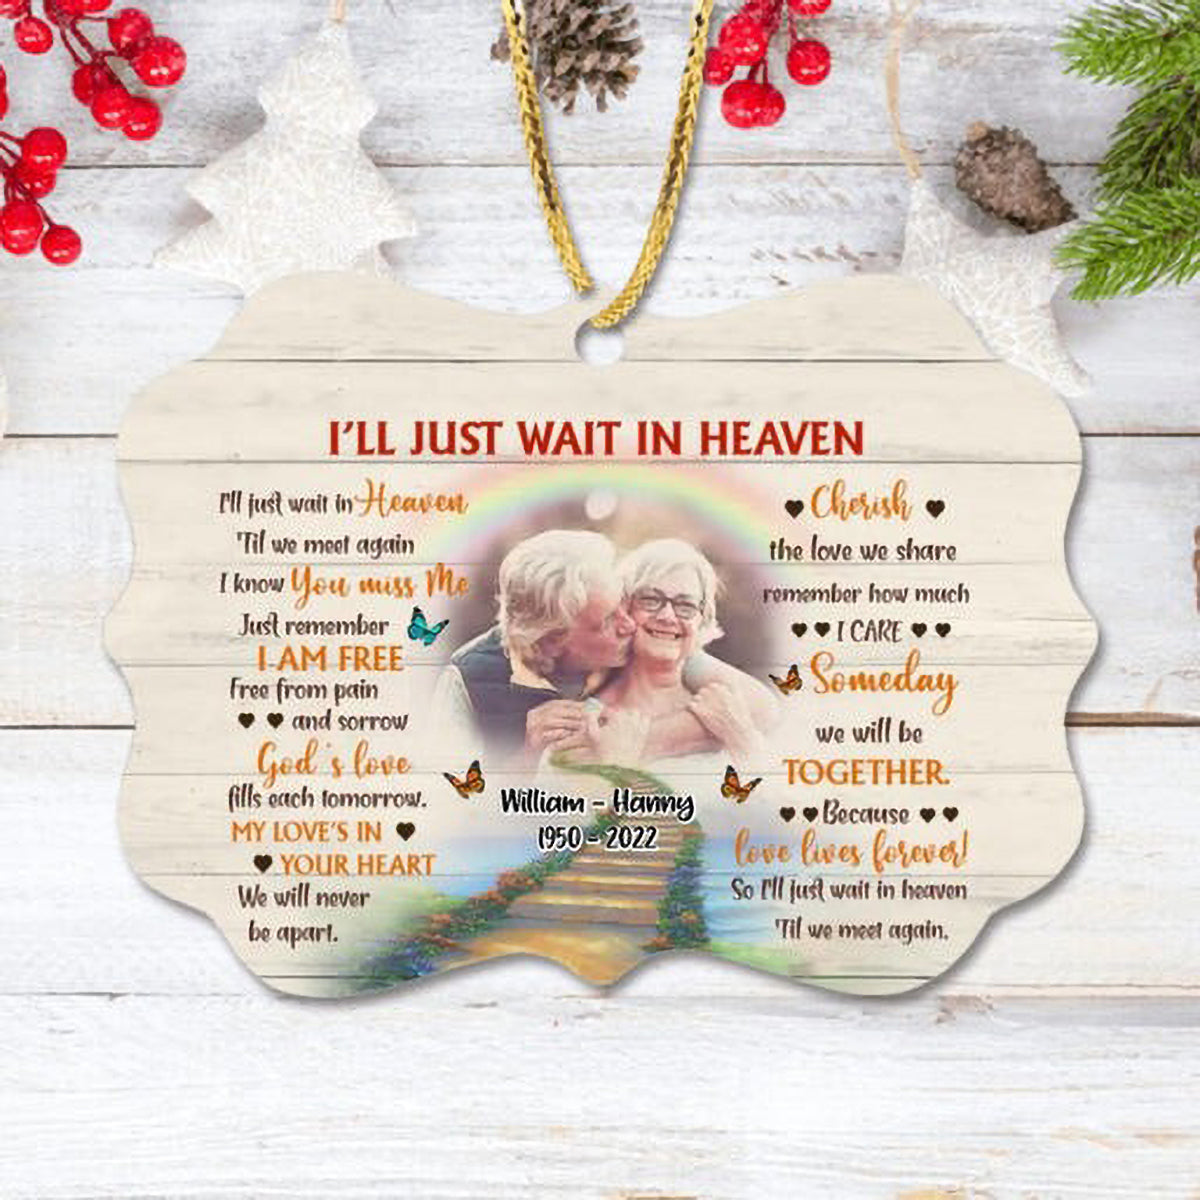 Customized Couple Photo Aluminum Ornament, Personalized Memorial Photo Aluminum Ornament, I'll Just Wait In Heaven - Memorial Gift For Couple, Spouse